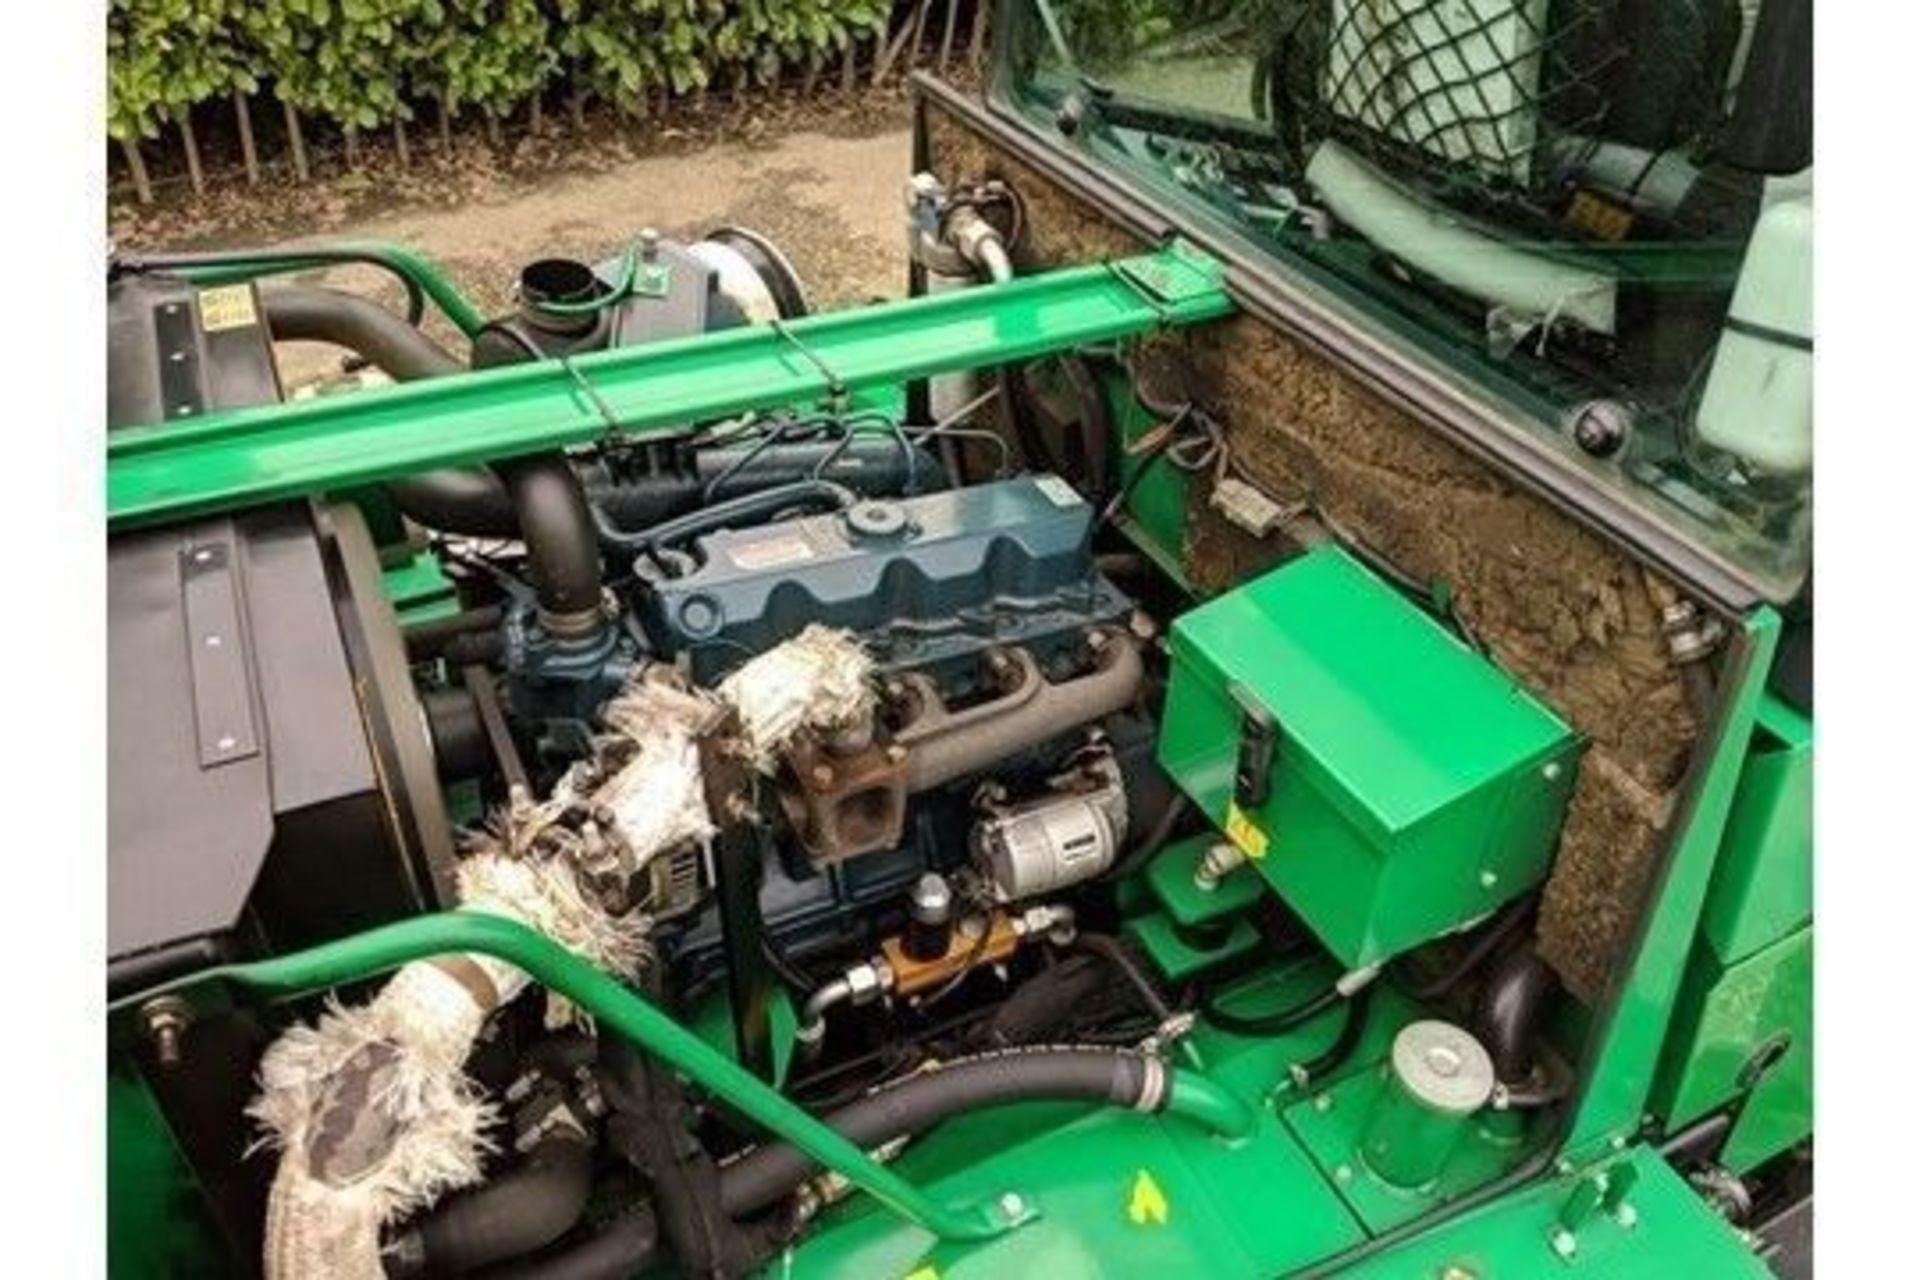 2012 Ransomes Commander 3520 4WD Cylinder Mower - Image 2 of 8